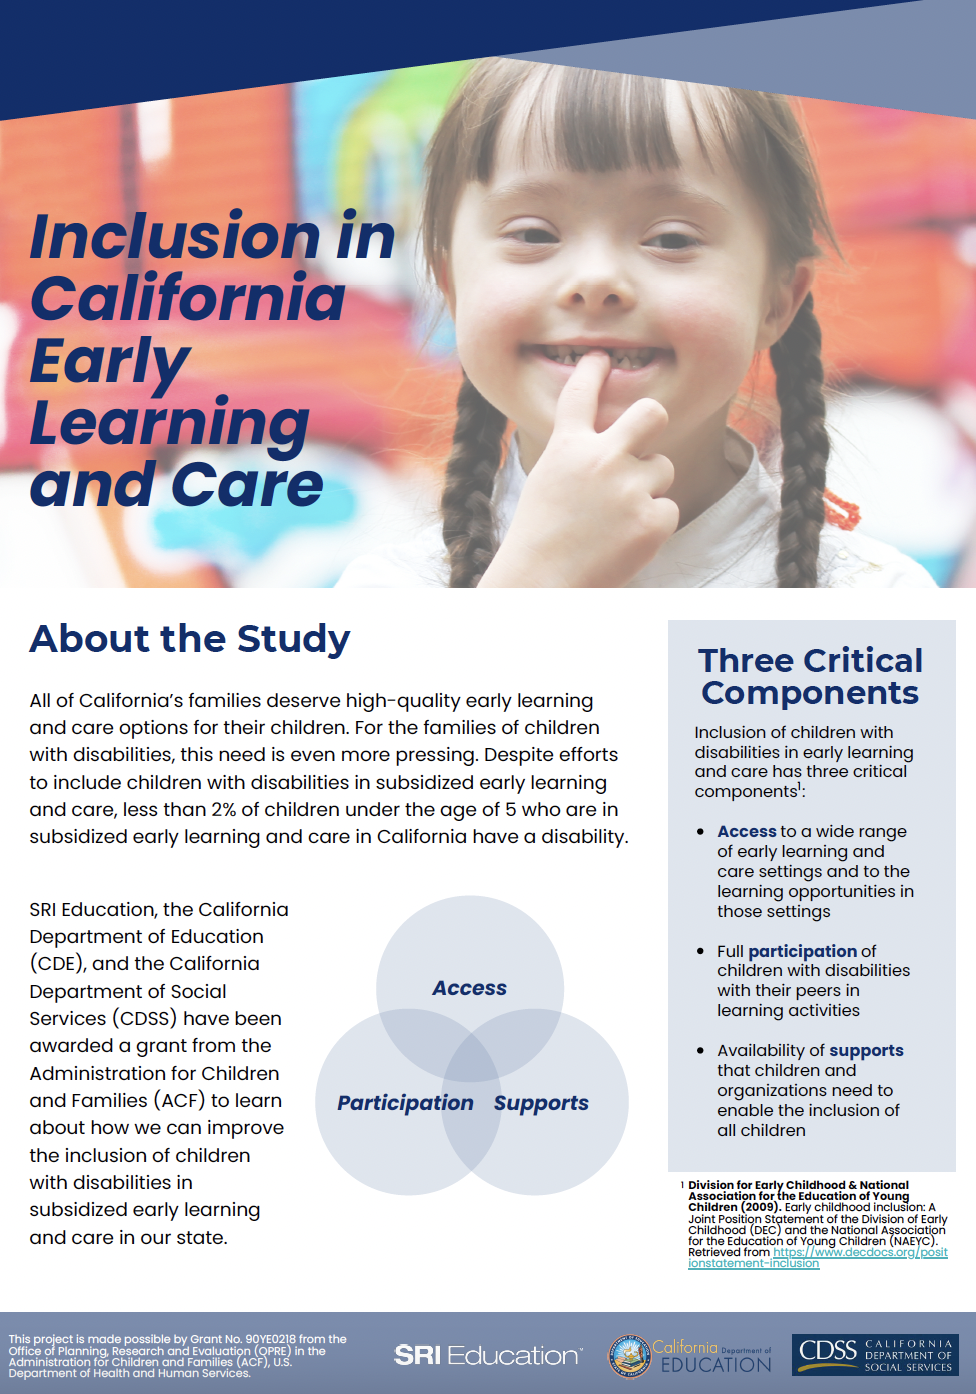 Cover Image of Study Flyer: Inclusion of Children with Disabilities in Subsidized Child Care in California